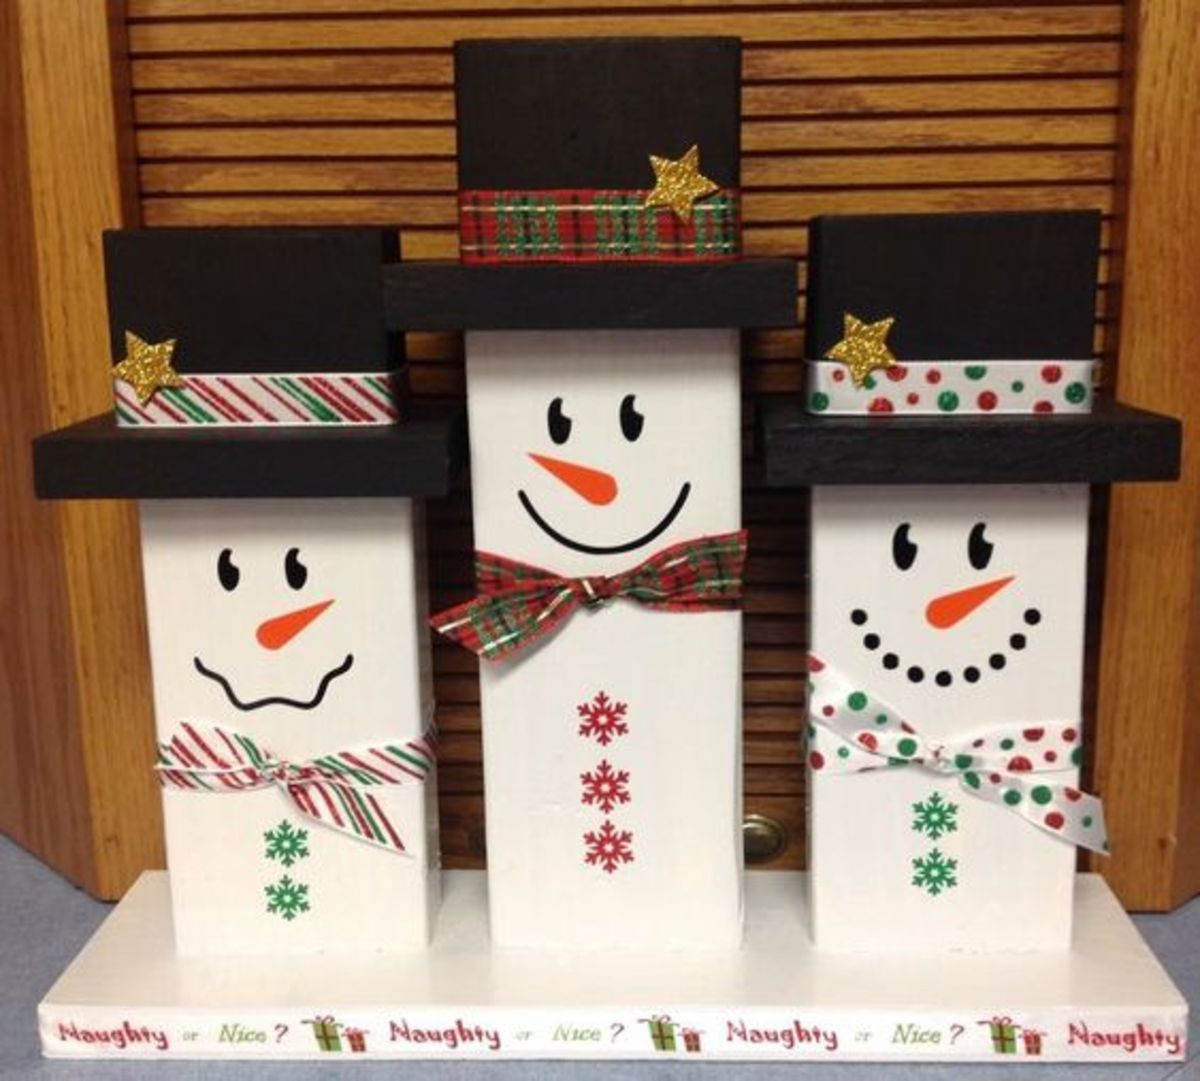 Wood Block Snowman Craft - The Best Christmas Craft this Season - Easy  Peasy and Fun